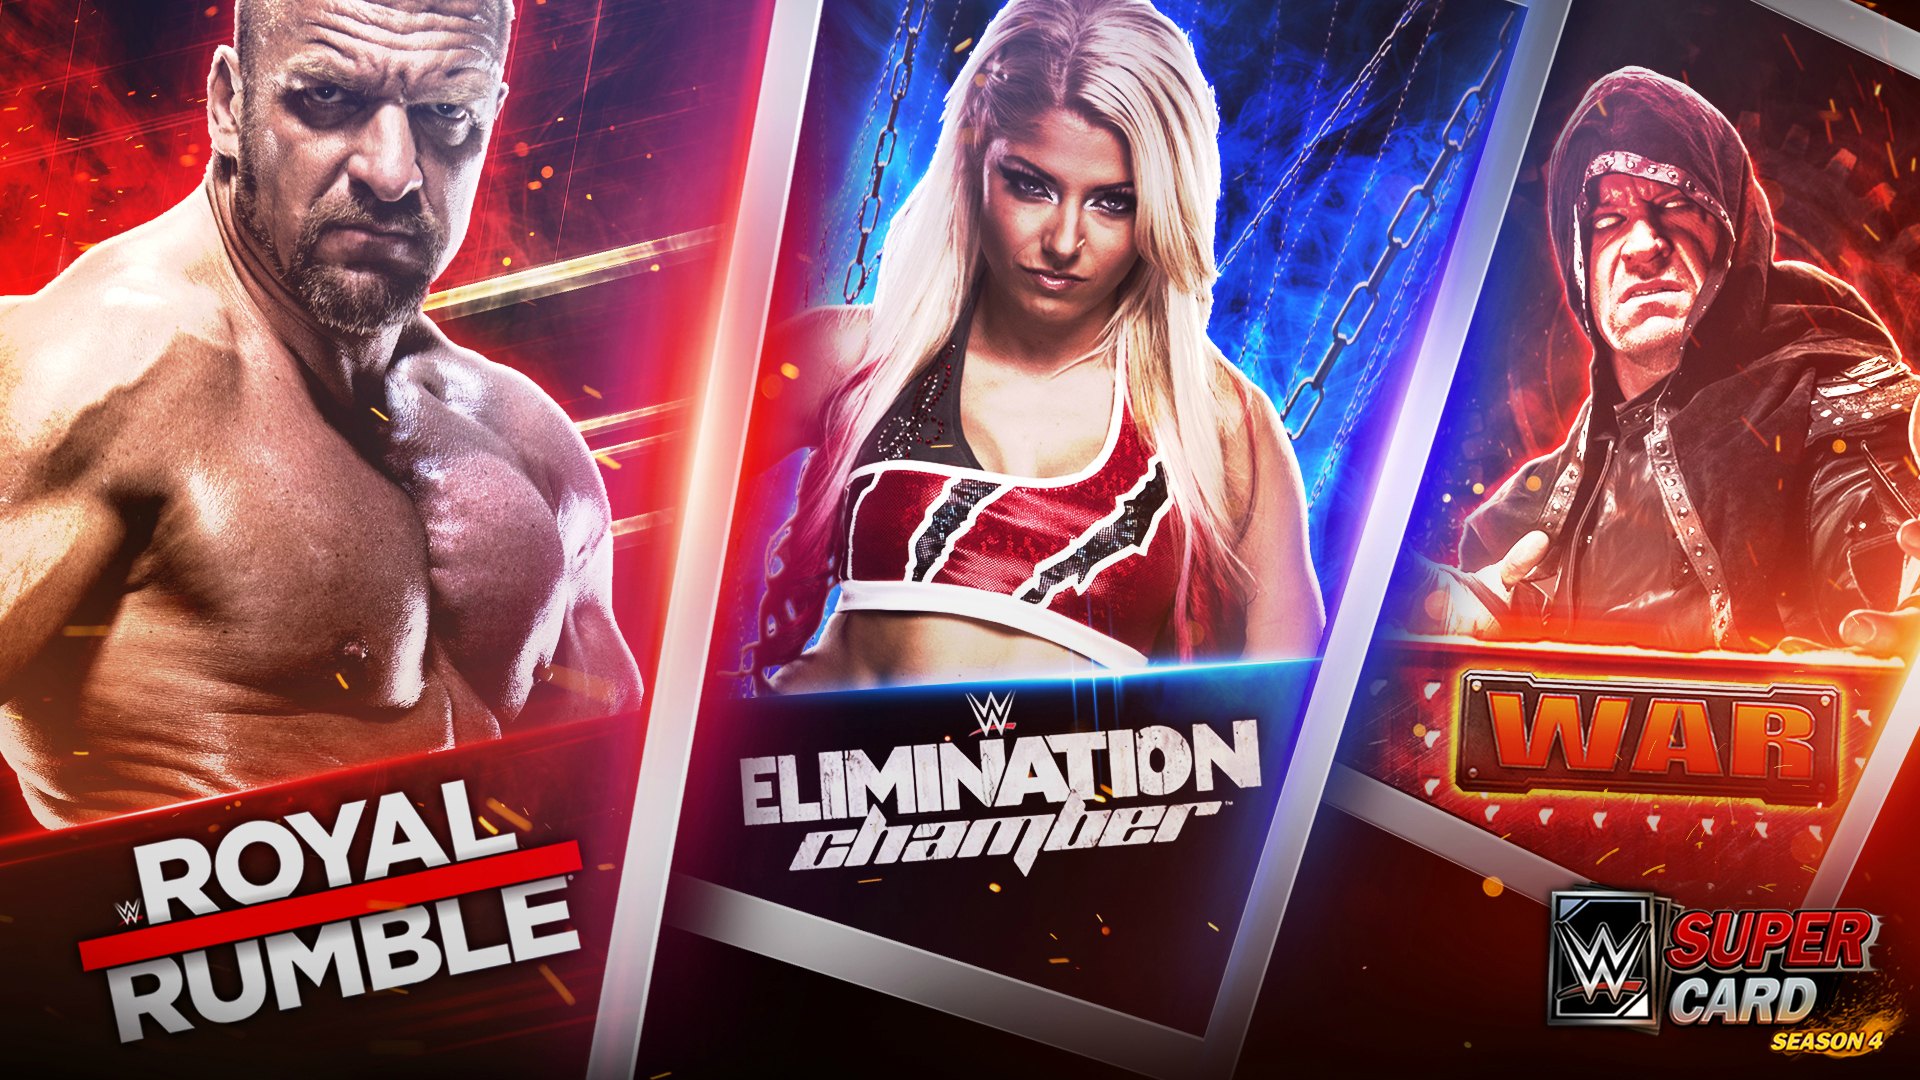 Free download WWE SuperCard Season 4 Details on New Unified PVP Leagues [1920x1080] for your Desktop, Mobile & Tablet. Explore Elimination Chamber 2019 Wallpaper. Elimination Chamber 2019 Wallpaper, Elimination Chamber Wallpaper, Elimination